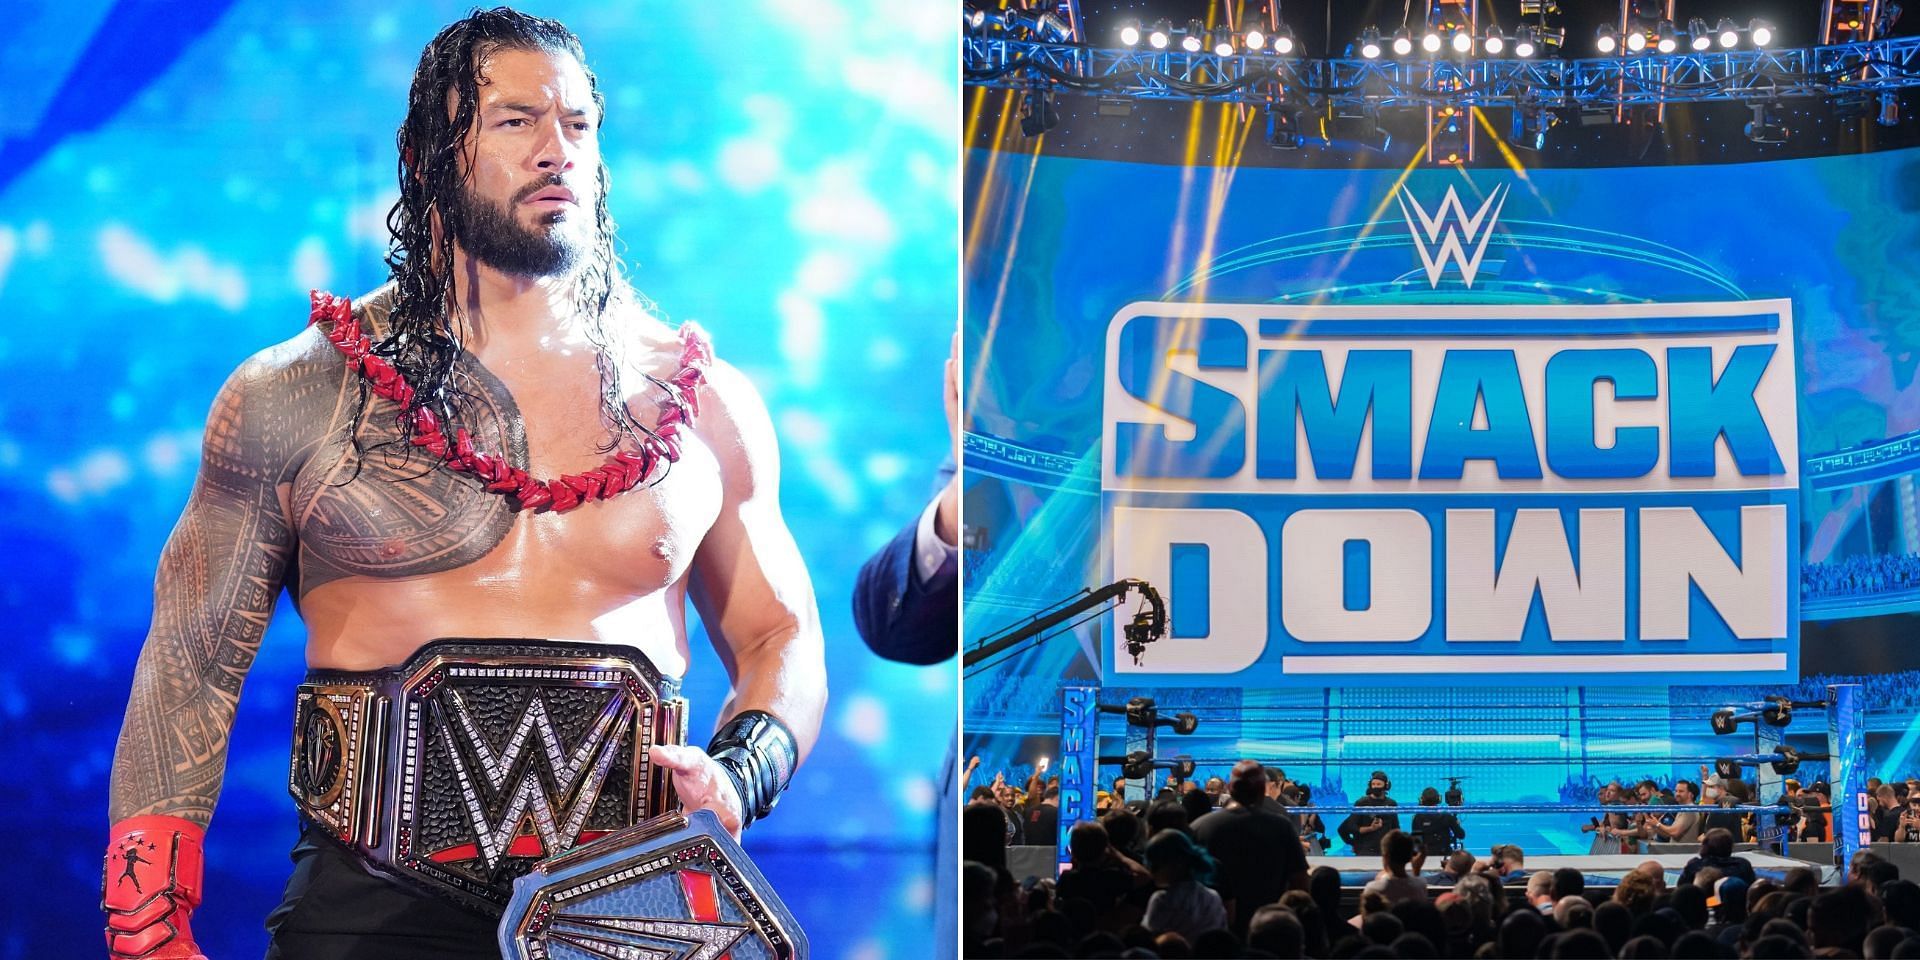 Roman Reigns has been drafted to SmackDown